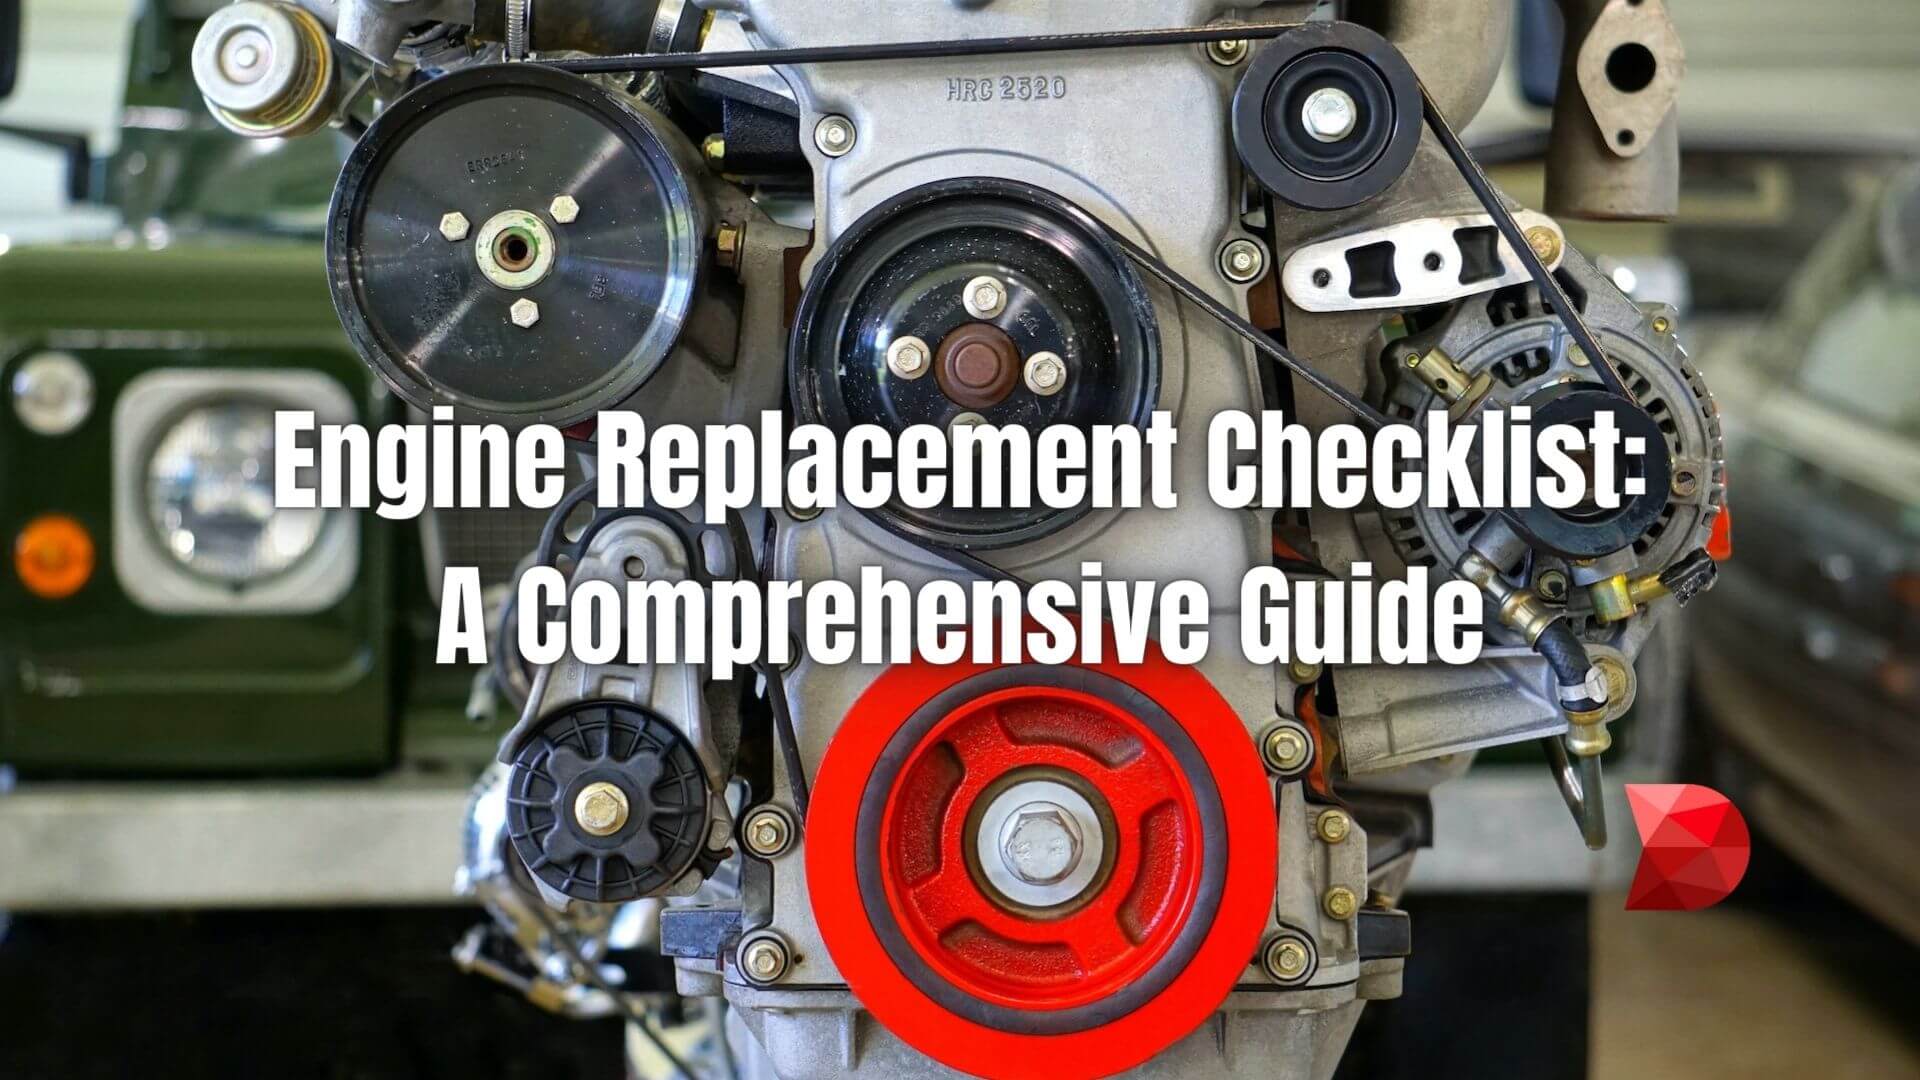 With the right engine replacement checklist and some preparation, replacing an engine will not be daunting. Learn all the steps here.